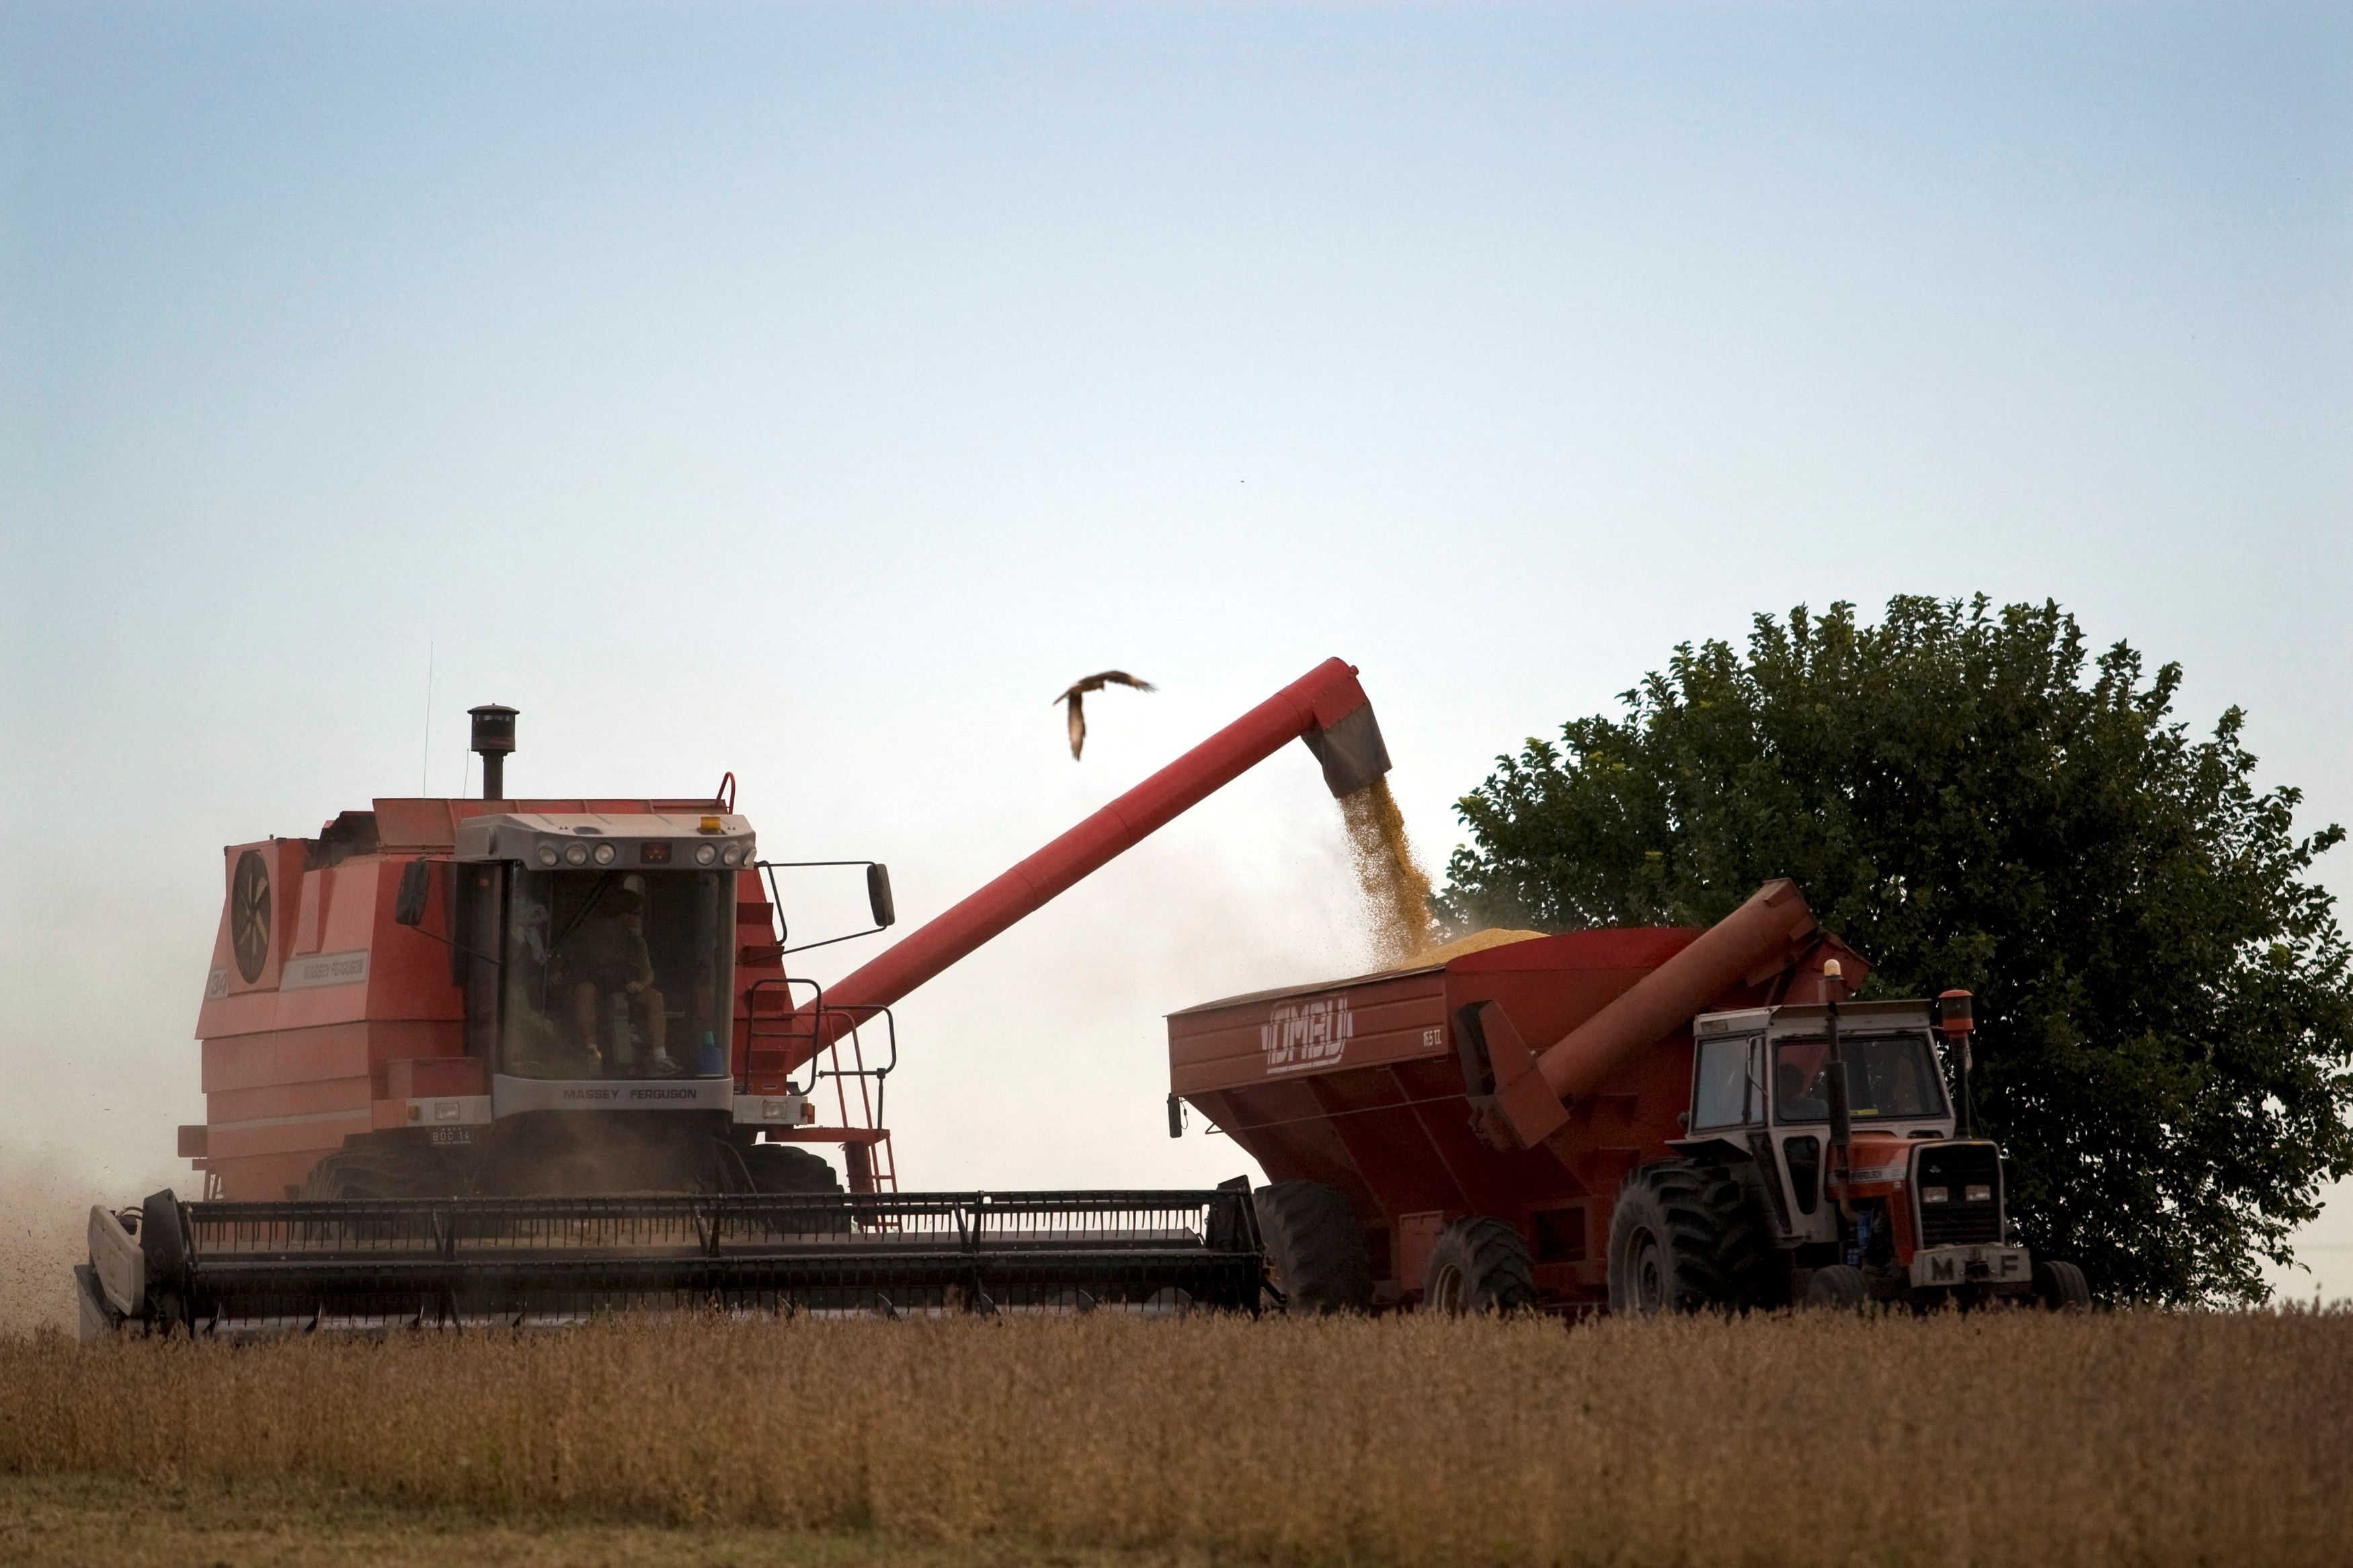 Farmers harvest soybeans in Argentina's town of Estacion Islas